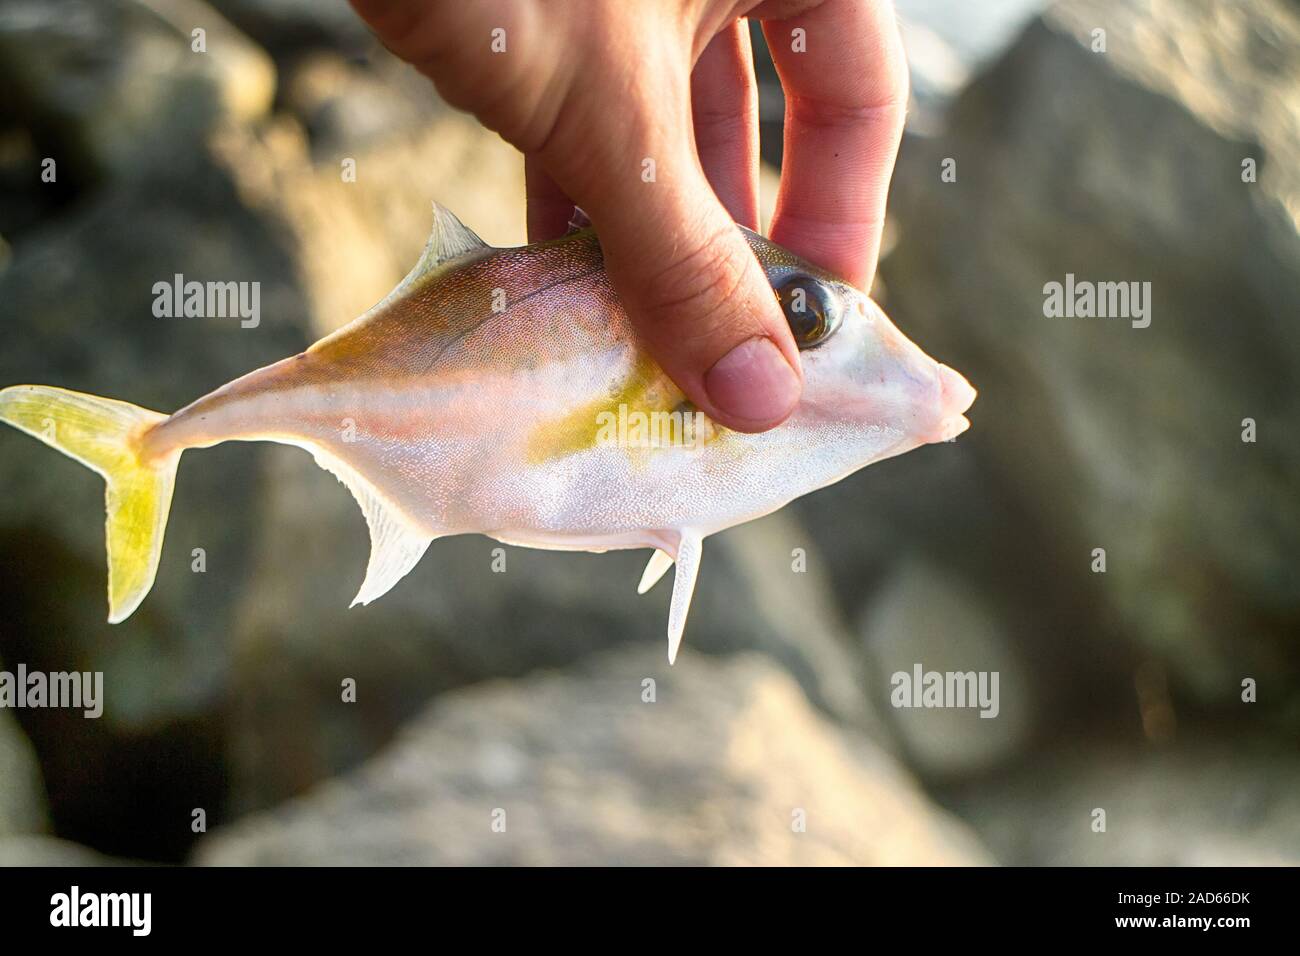 Amateur fishing in India 6. This triggerfish caught on clam meat Stock Photo